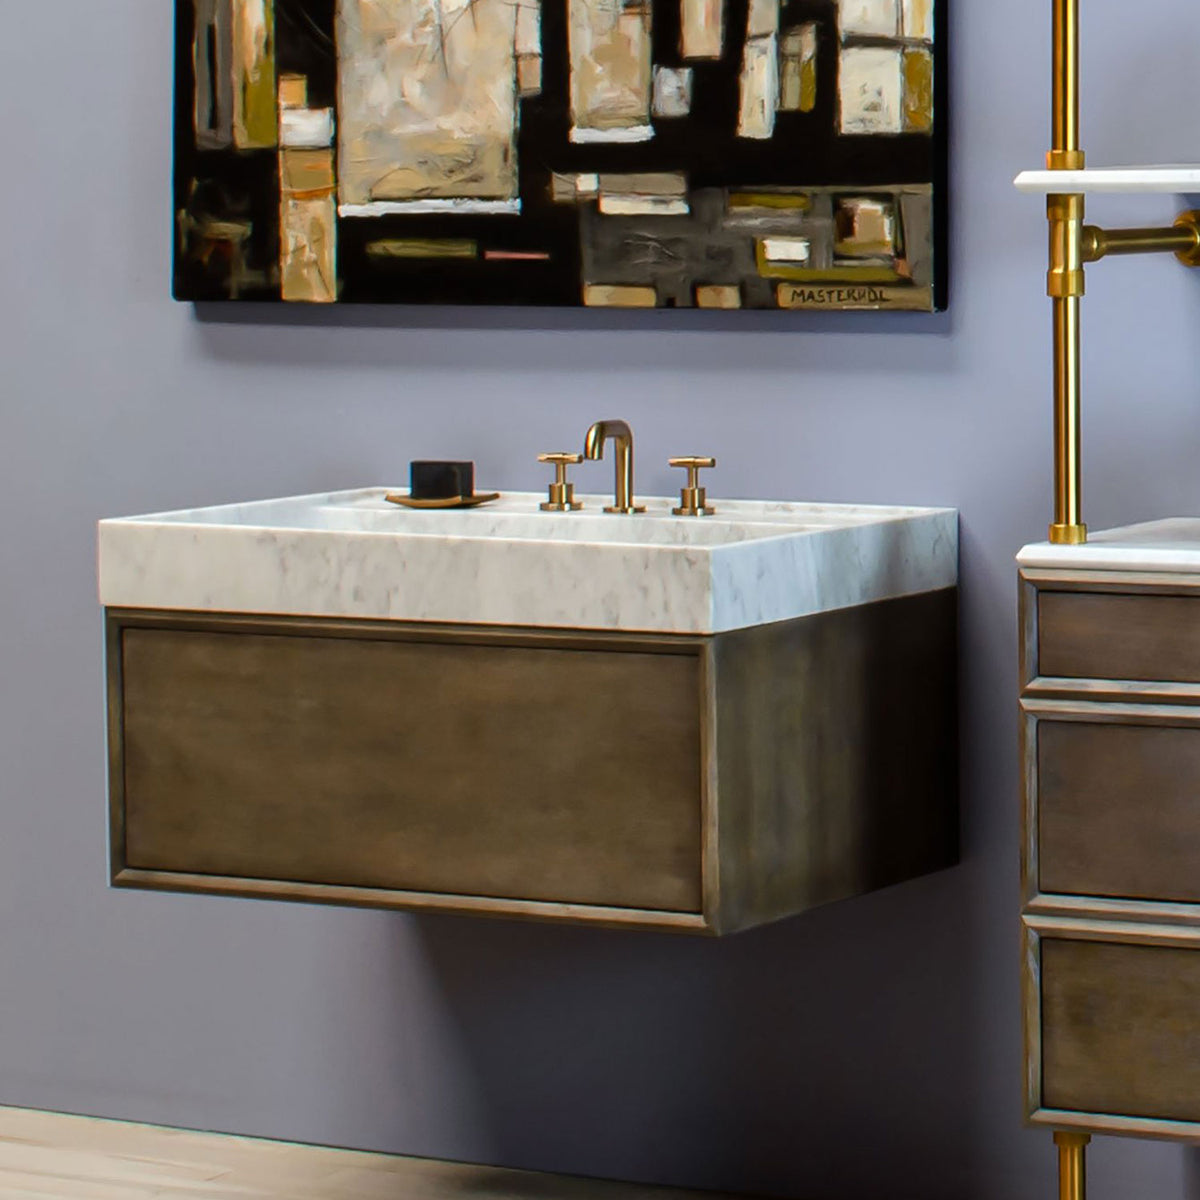 Ventus Bath Sink with Faucet Deck in carrara marble paired with Elemental Hanging Vanity in cement gray wood image 1 of 3